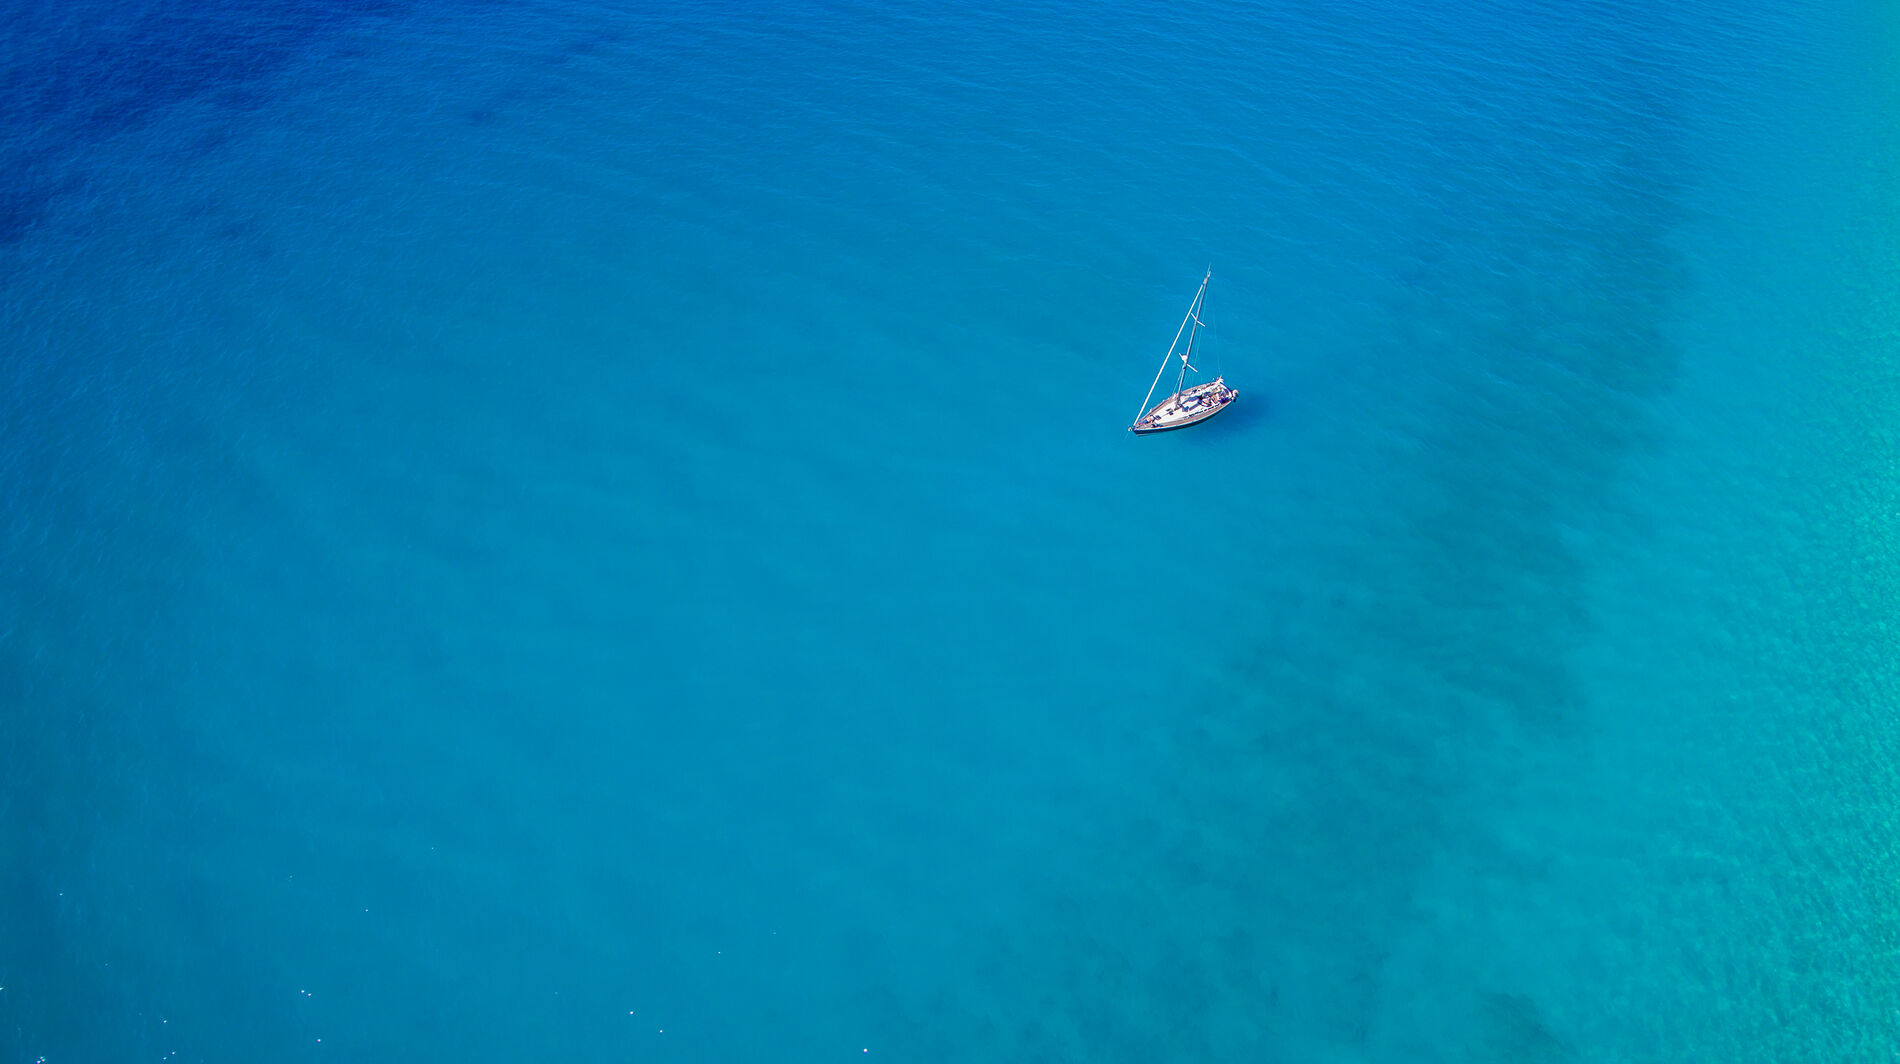 Kathisma beach aerial view of a yacht in the sea